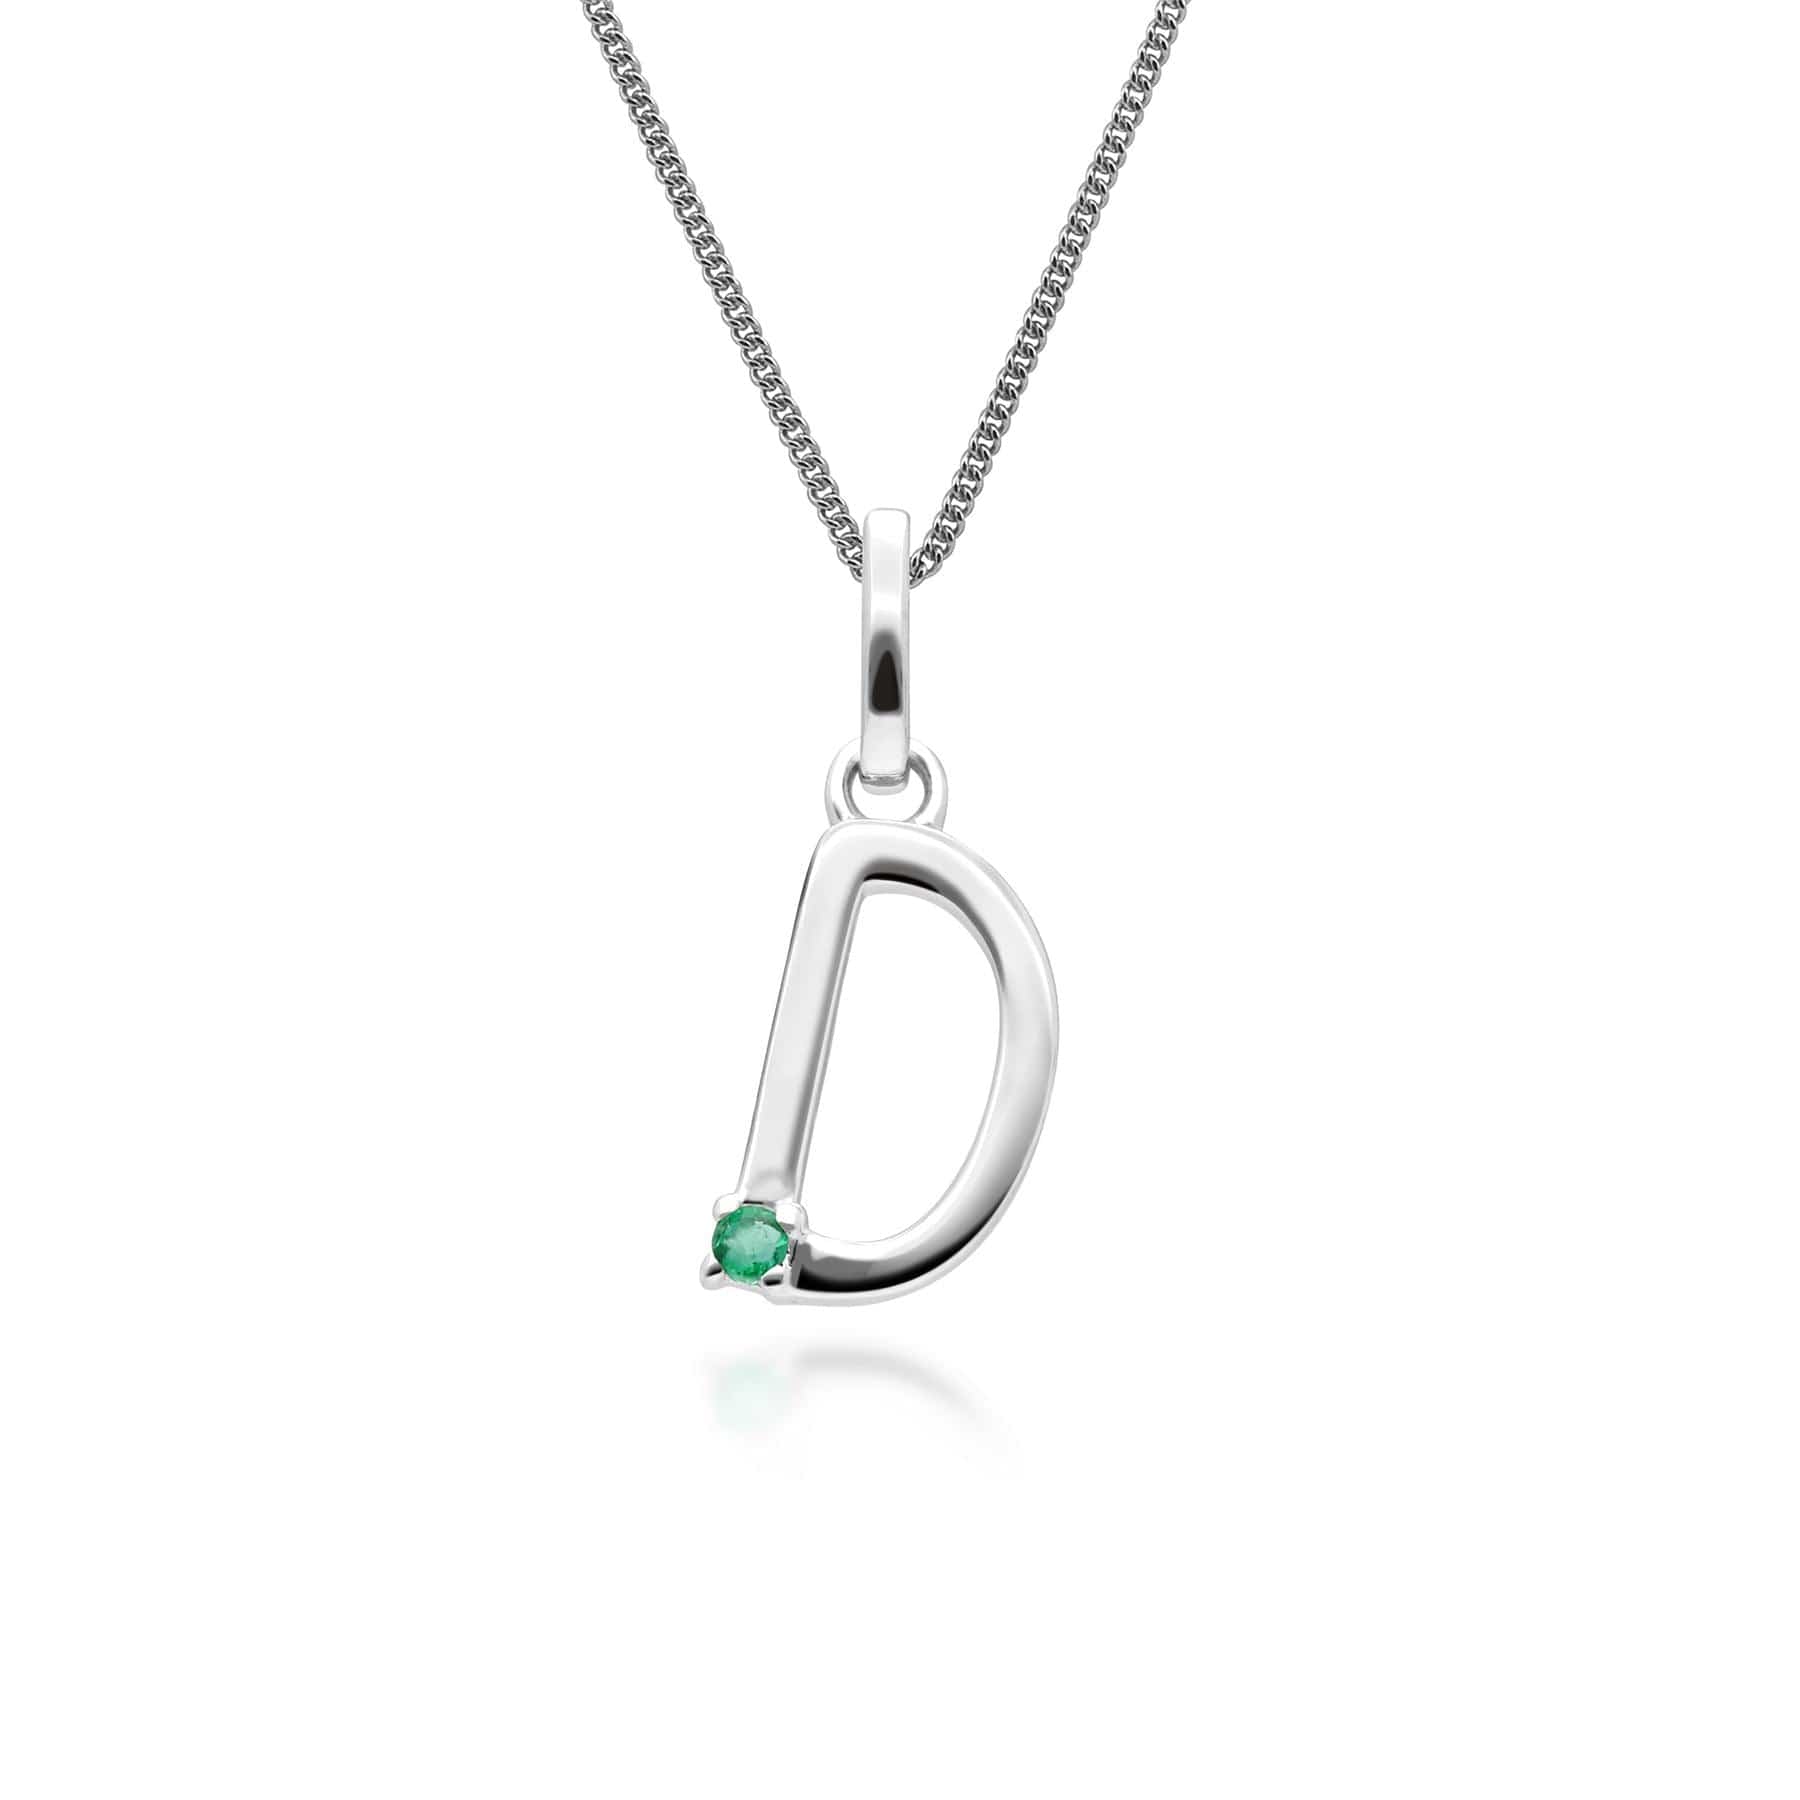 162P0255019 Initial Emerald Letter Charm Necklace in 9ct White Gold 5